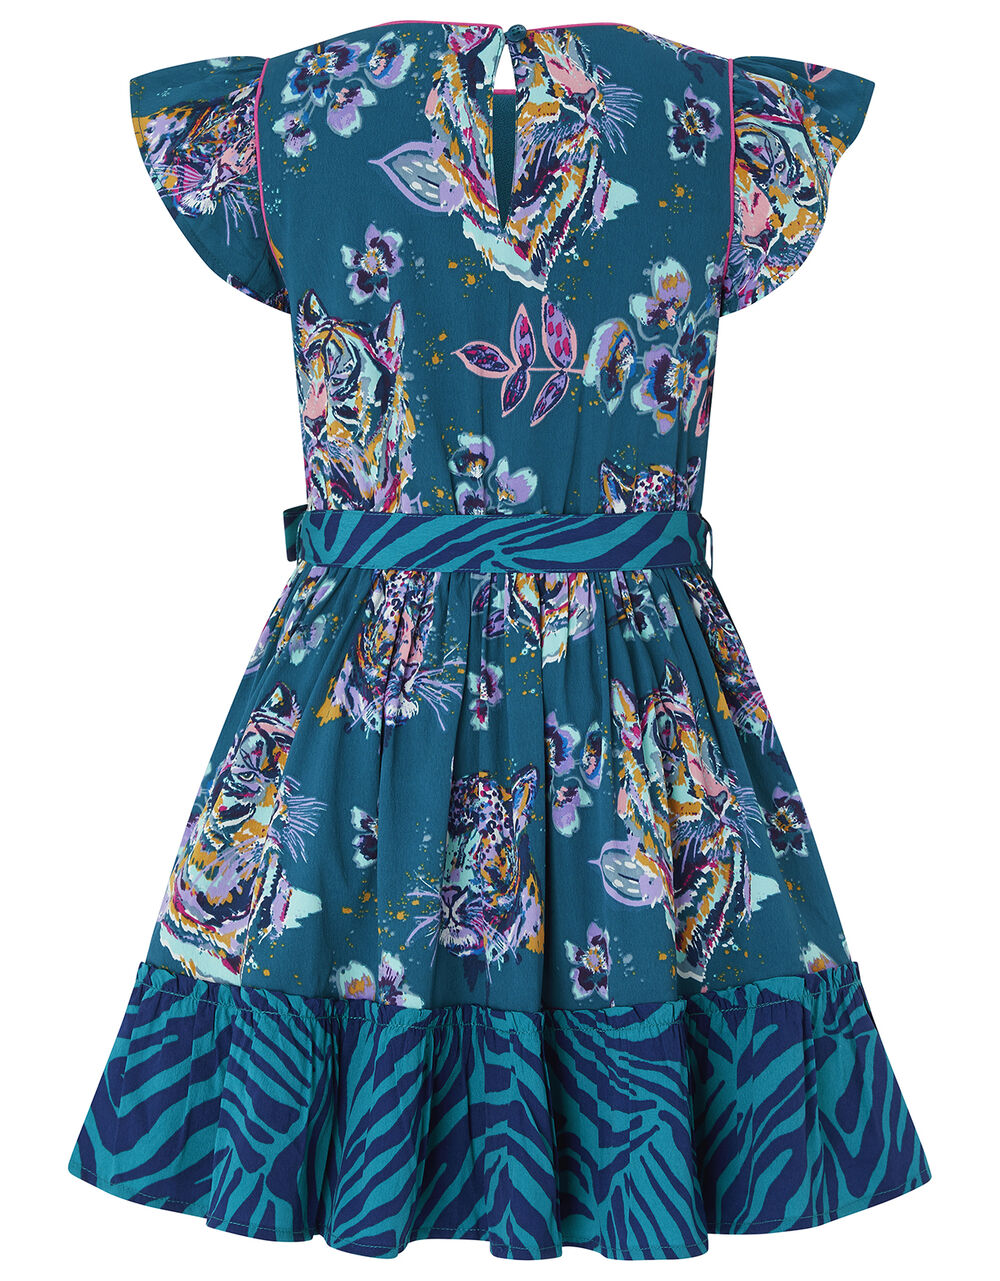 Blaire Jungle Printed Dress in Recycled Polyester Teal | Girls' Dresses ...